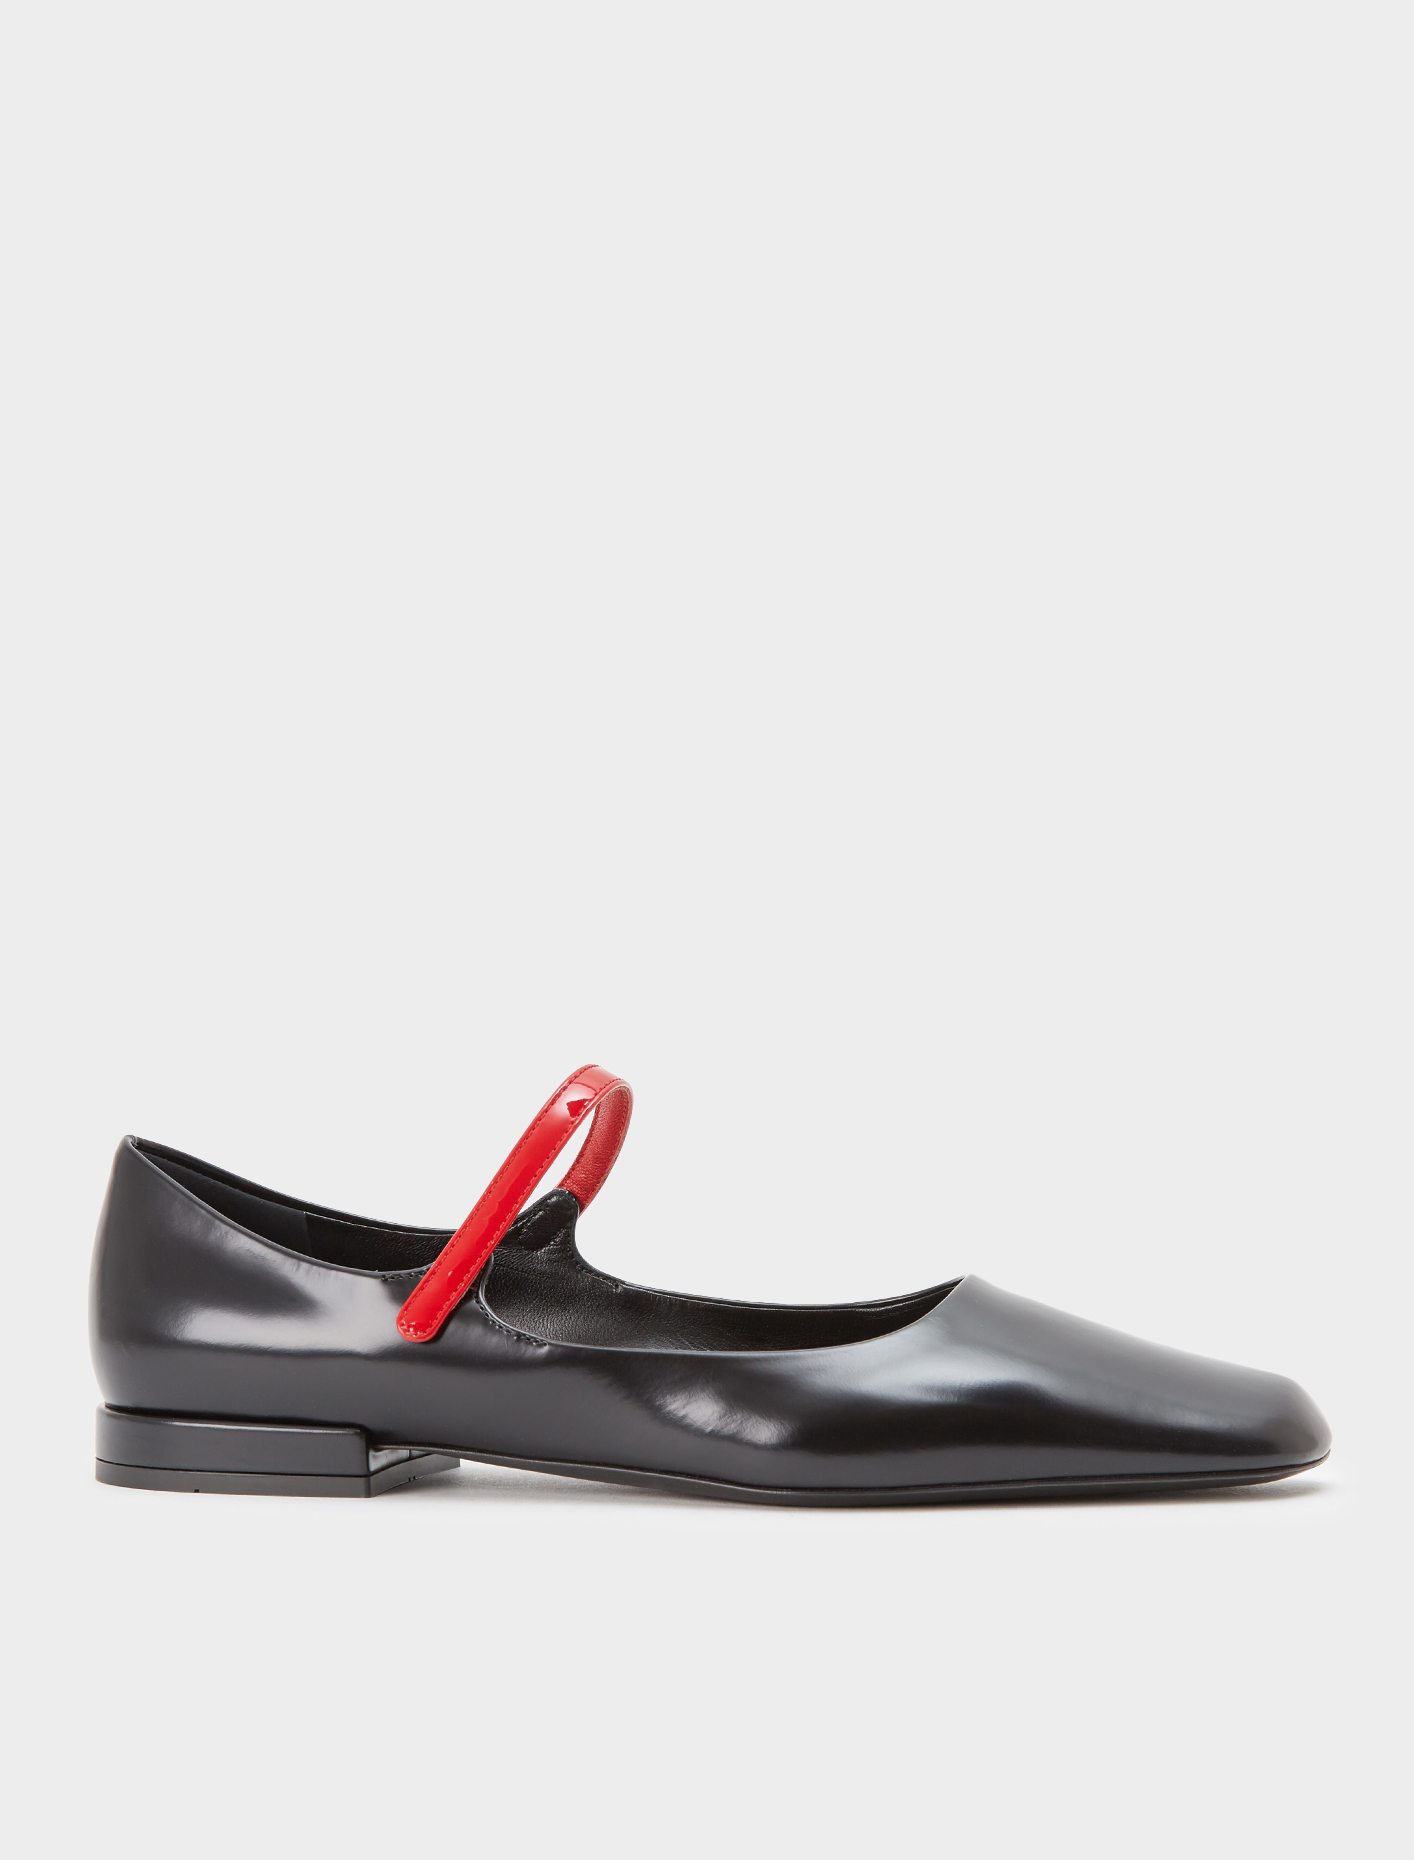 Prada Brushed Leather Ballet Flat with 